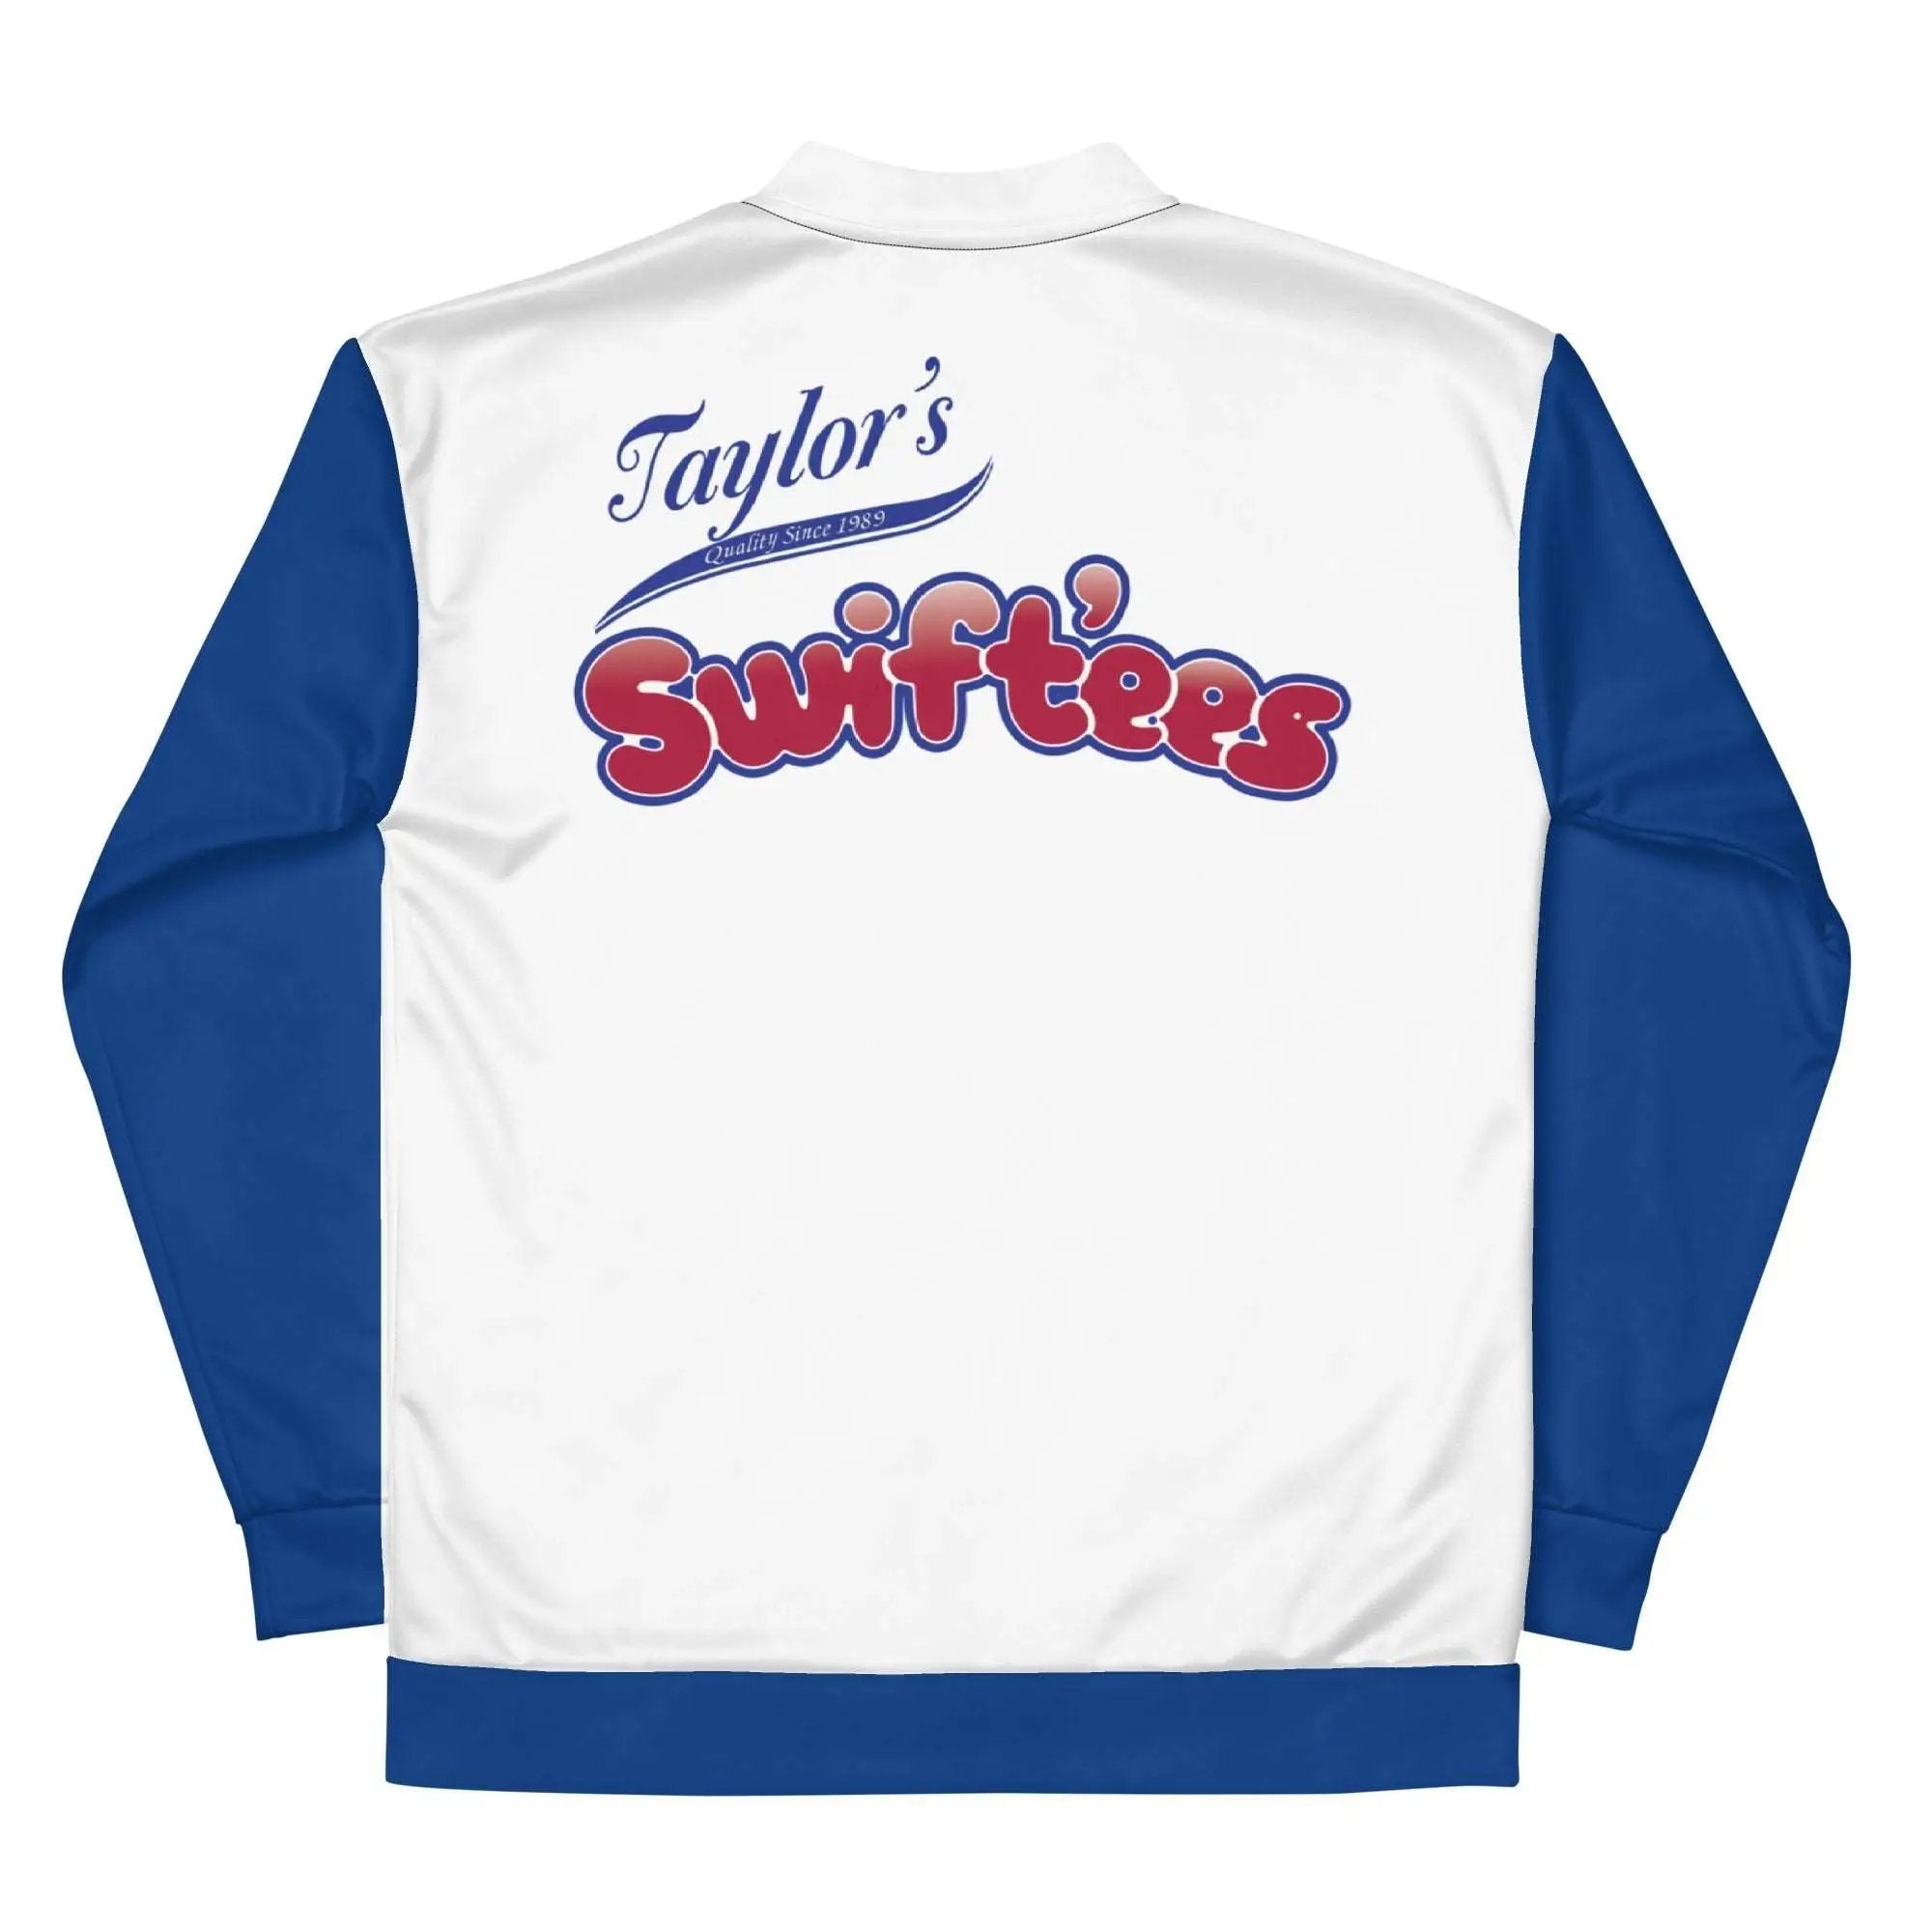 a white and blue shirt that says taylor's swiftfeasts